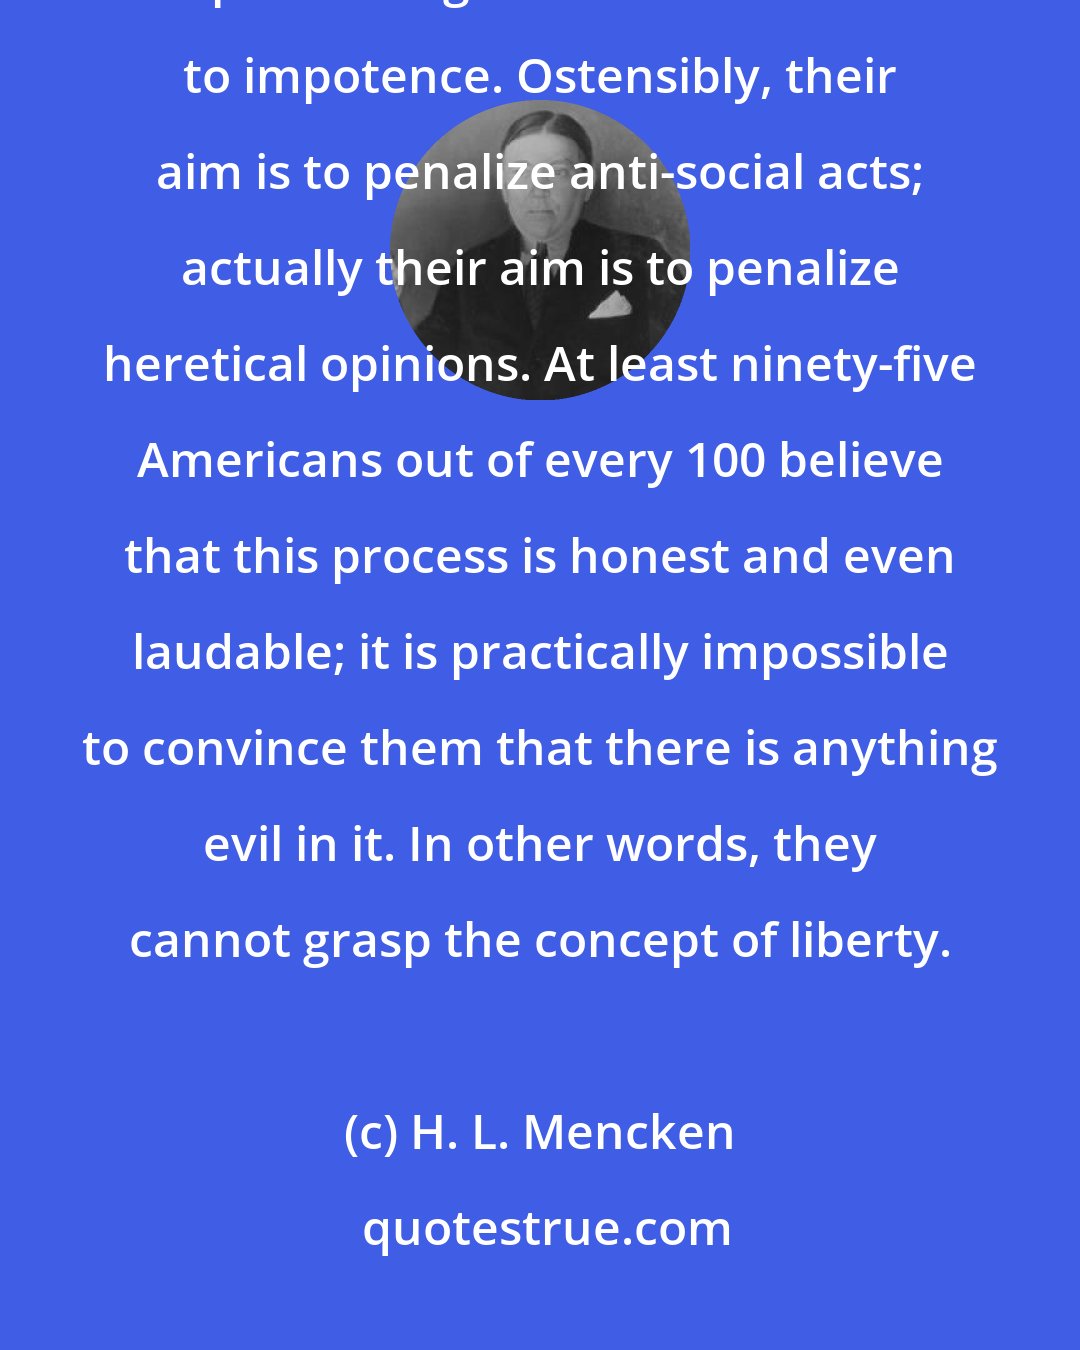 H. L. Mencken: One of the main purposes of laws in a democratic society is to put burdens upon intelligence and reduce it to impotence. Ostensibly, their aim is to penalize anti-social acts; actually their aim is to penalize heretical opinions. At least ninety-five Americans out of every 100 believe that this process is honest and even laudable; it is practically impossible to convince them that there is anything evil in it. In other words, they cannot grasp the concept of liberty.